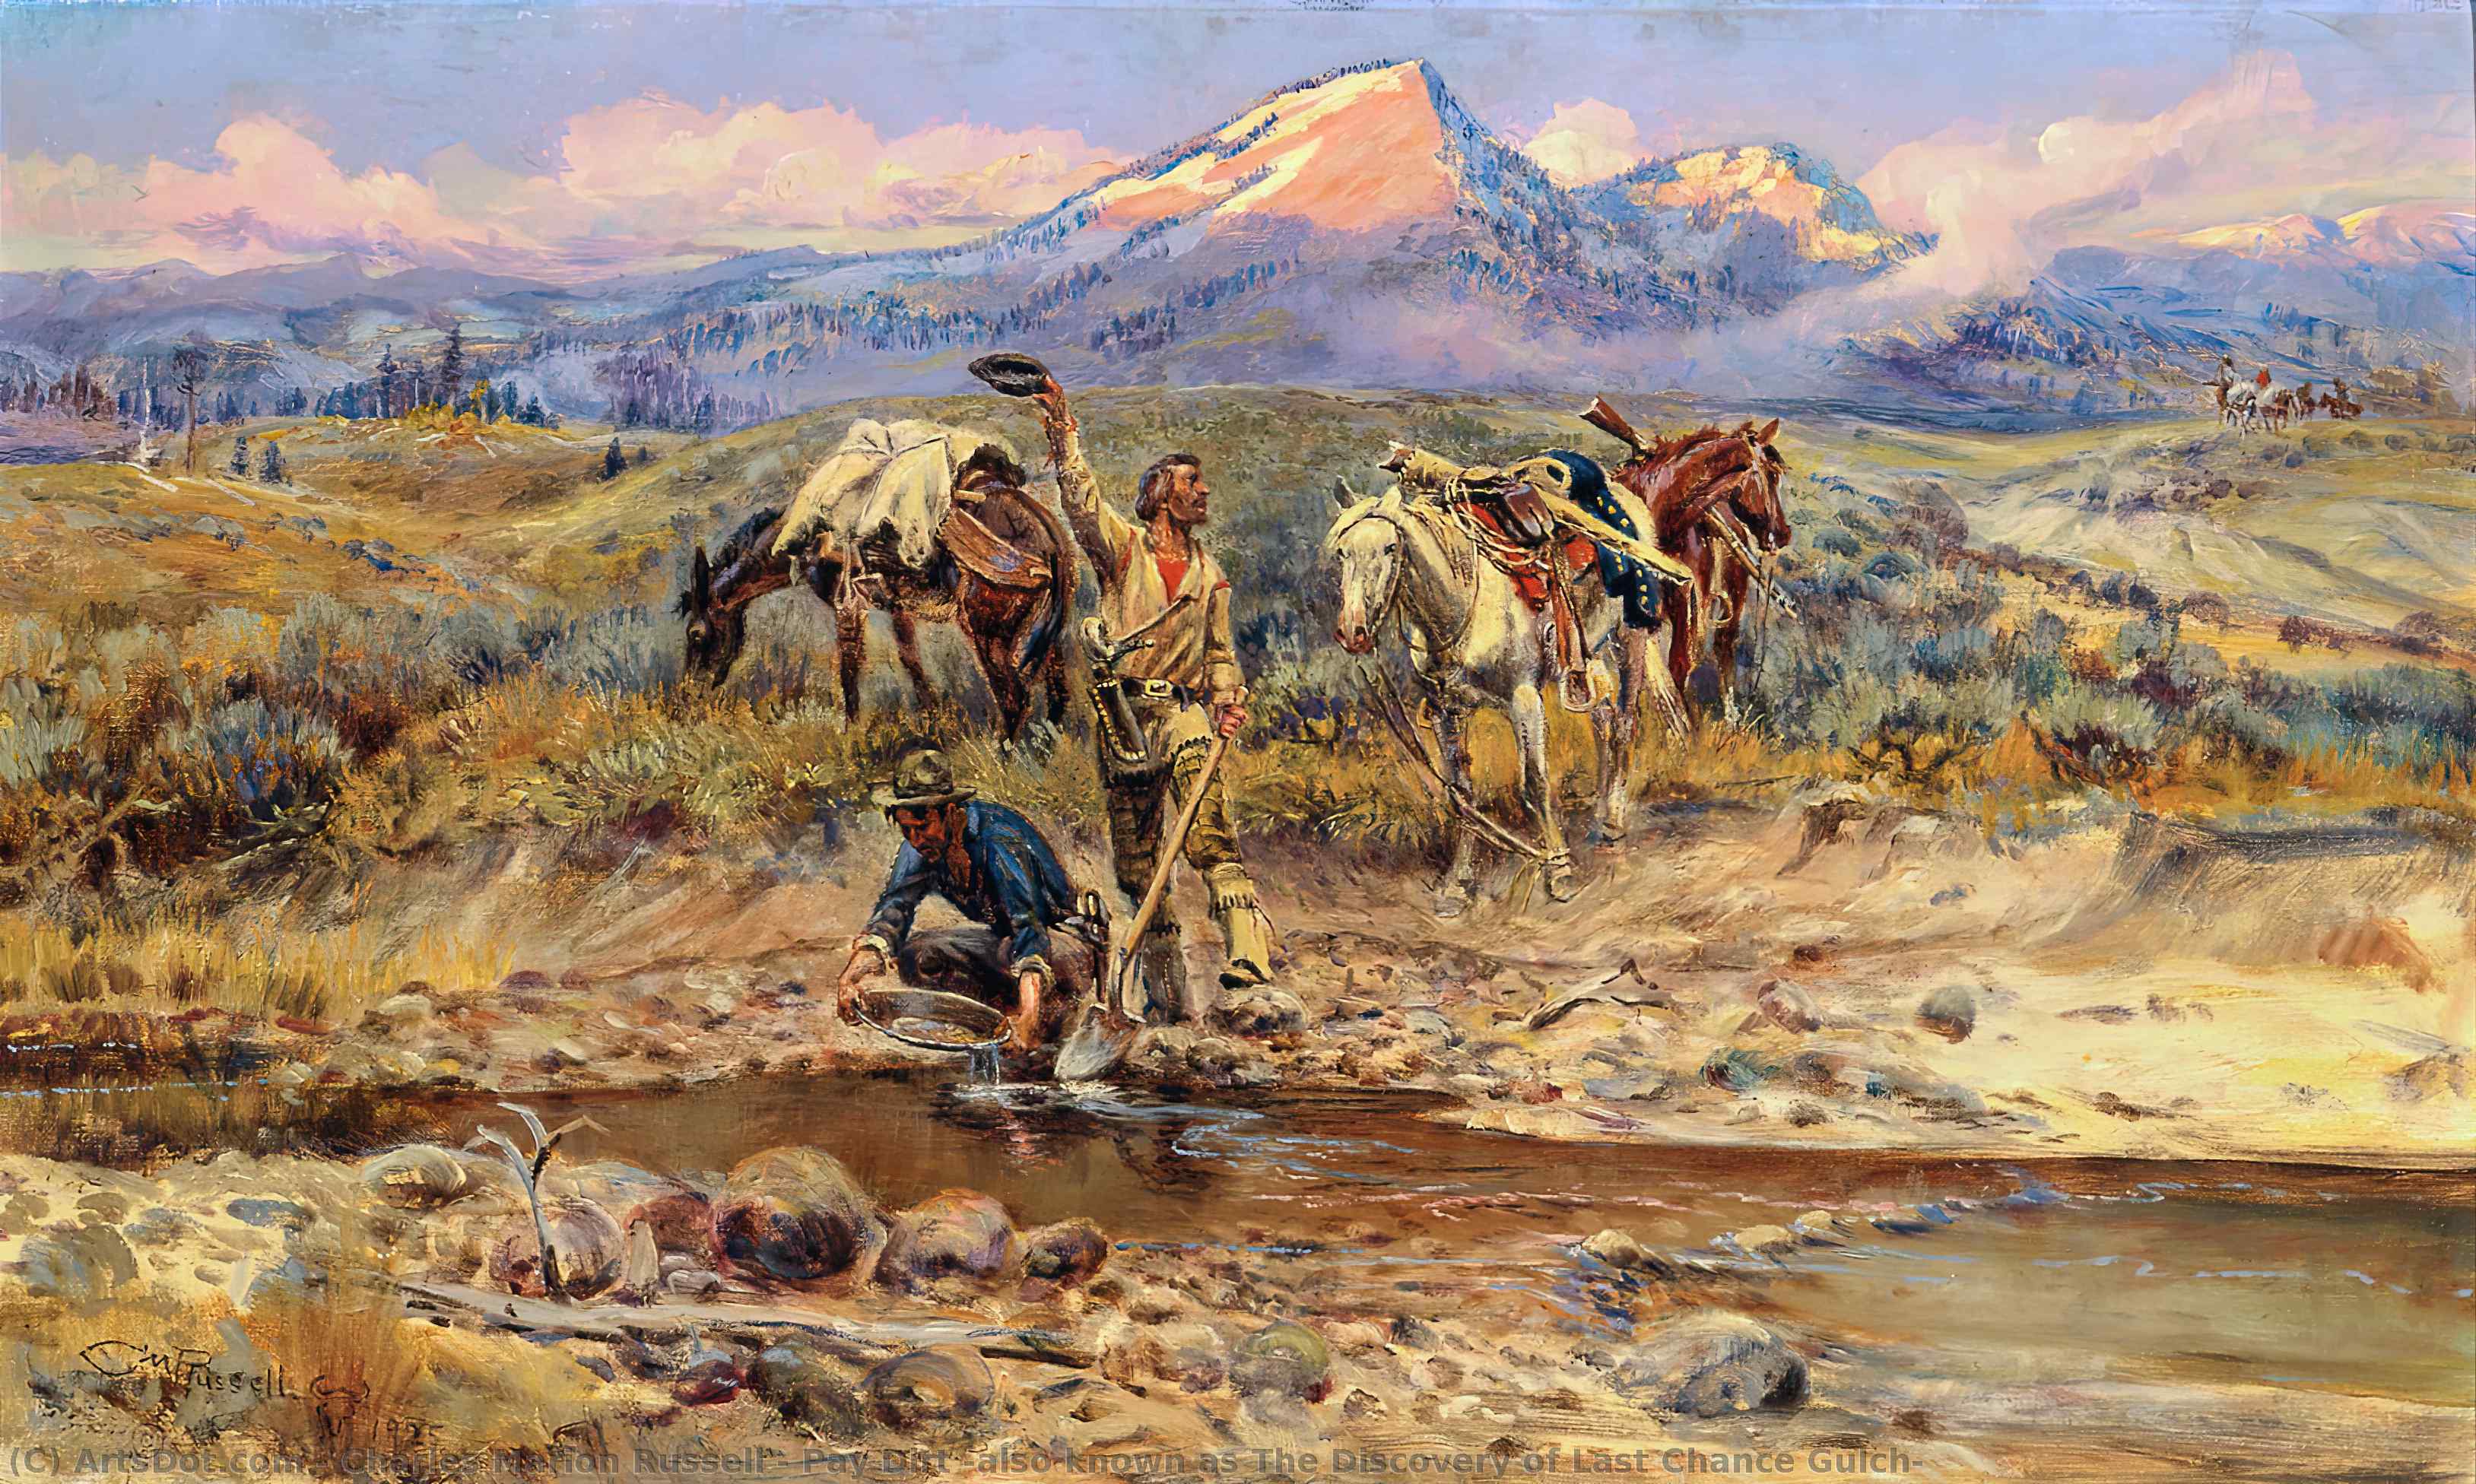 WikiOO.org - Encyclopedia of Fine Arts - Malba, Artwork Charles Marion Russell - Pay Dirt (also known as The Discovery of Last Chance Gulch)